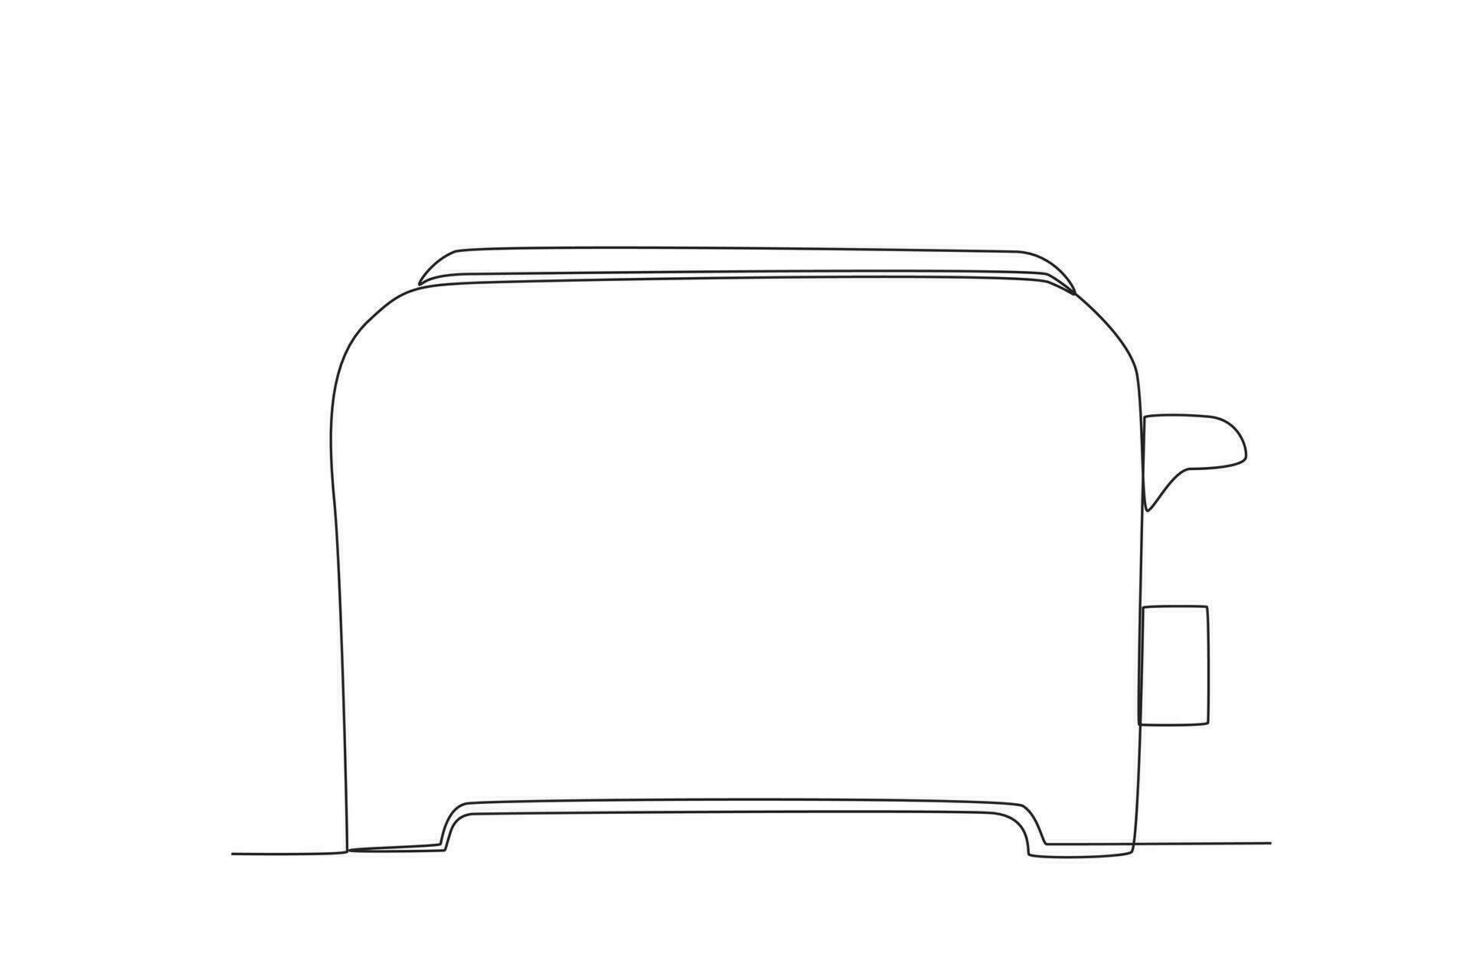 Toaster continuous line drawing vector illustration of kitchenware